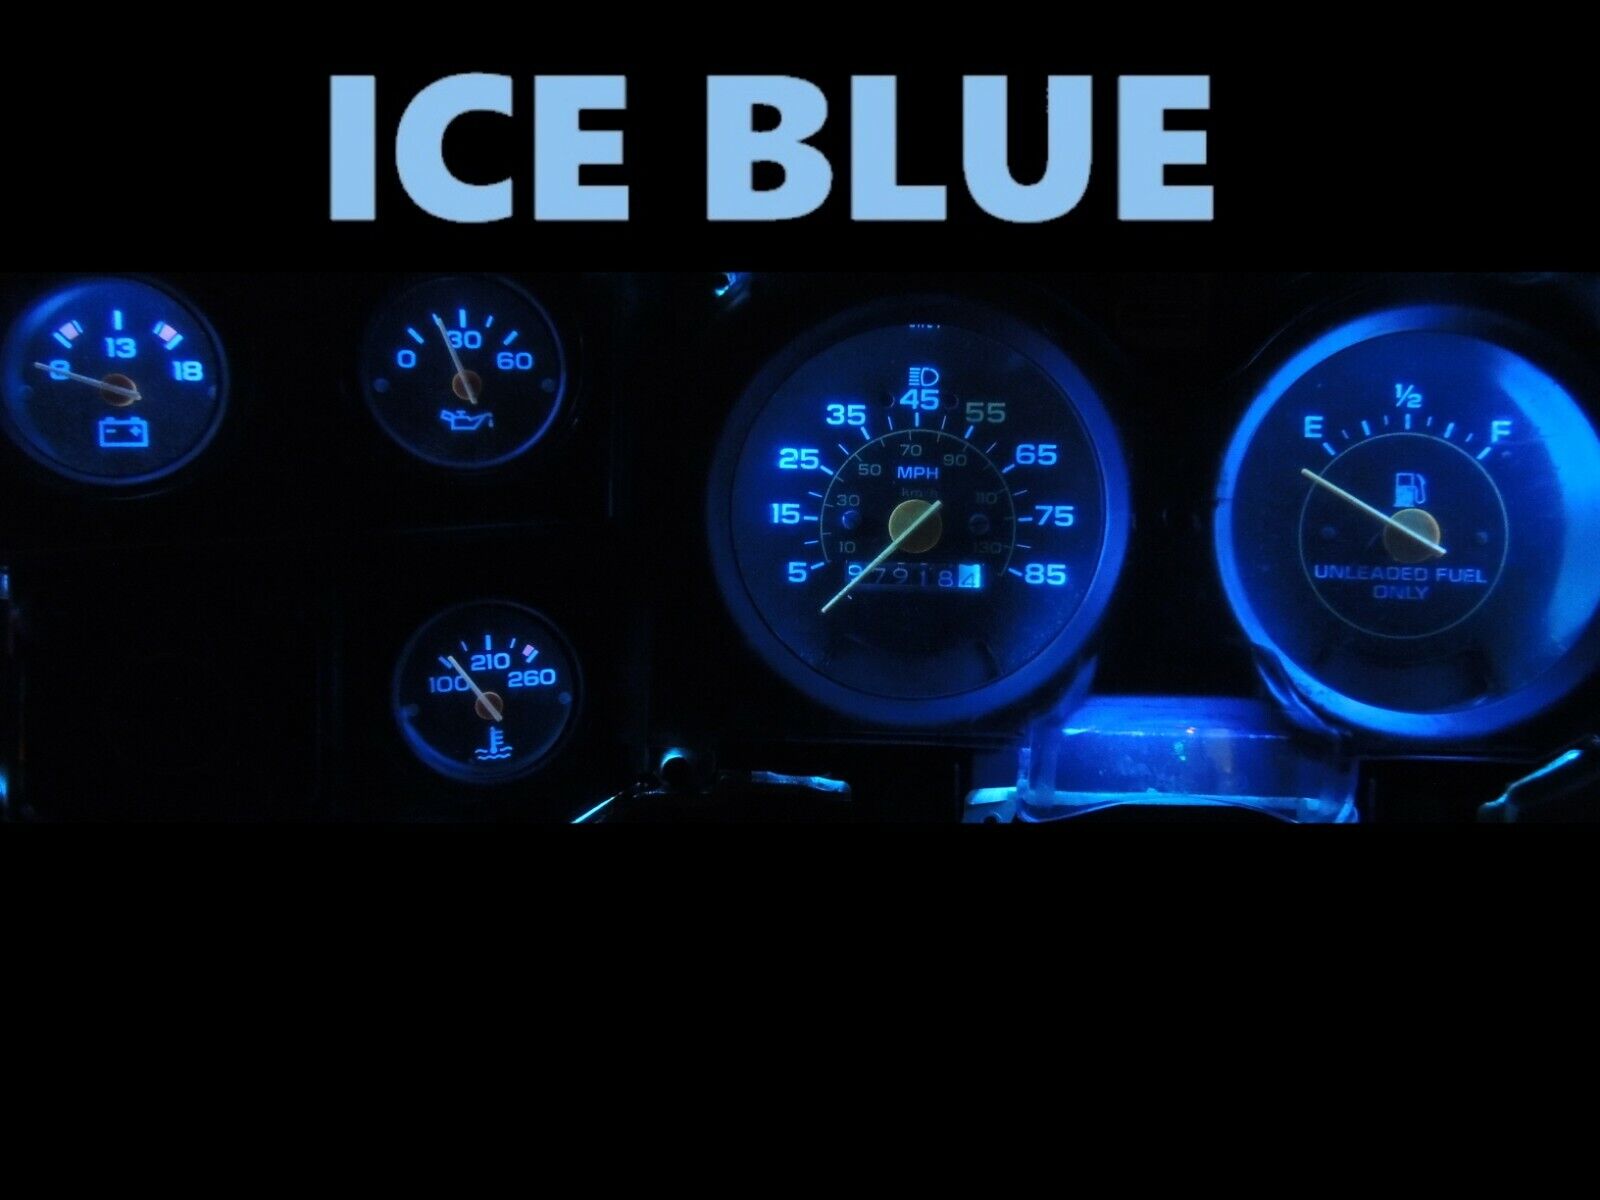 Gauge Cluster LED Dashboard Bulbs Ice Blue For Chevy 73-87 C10 C20 C30 Truck